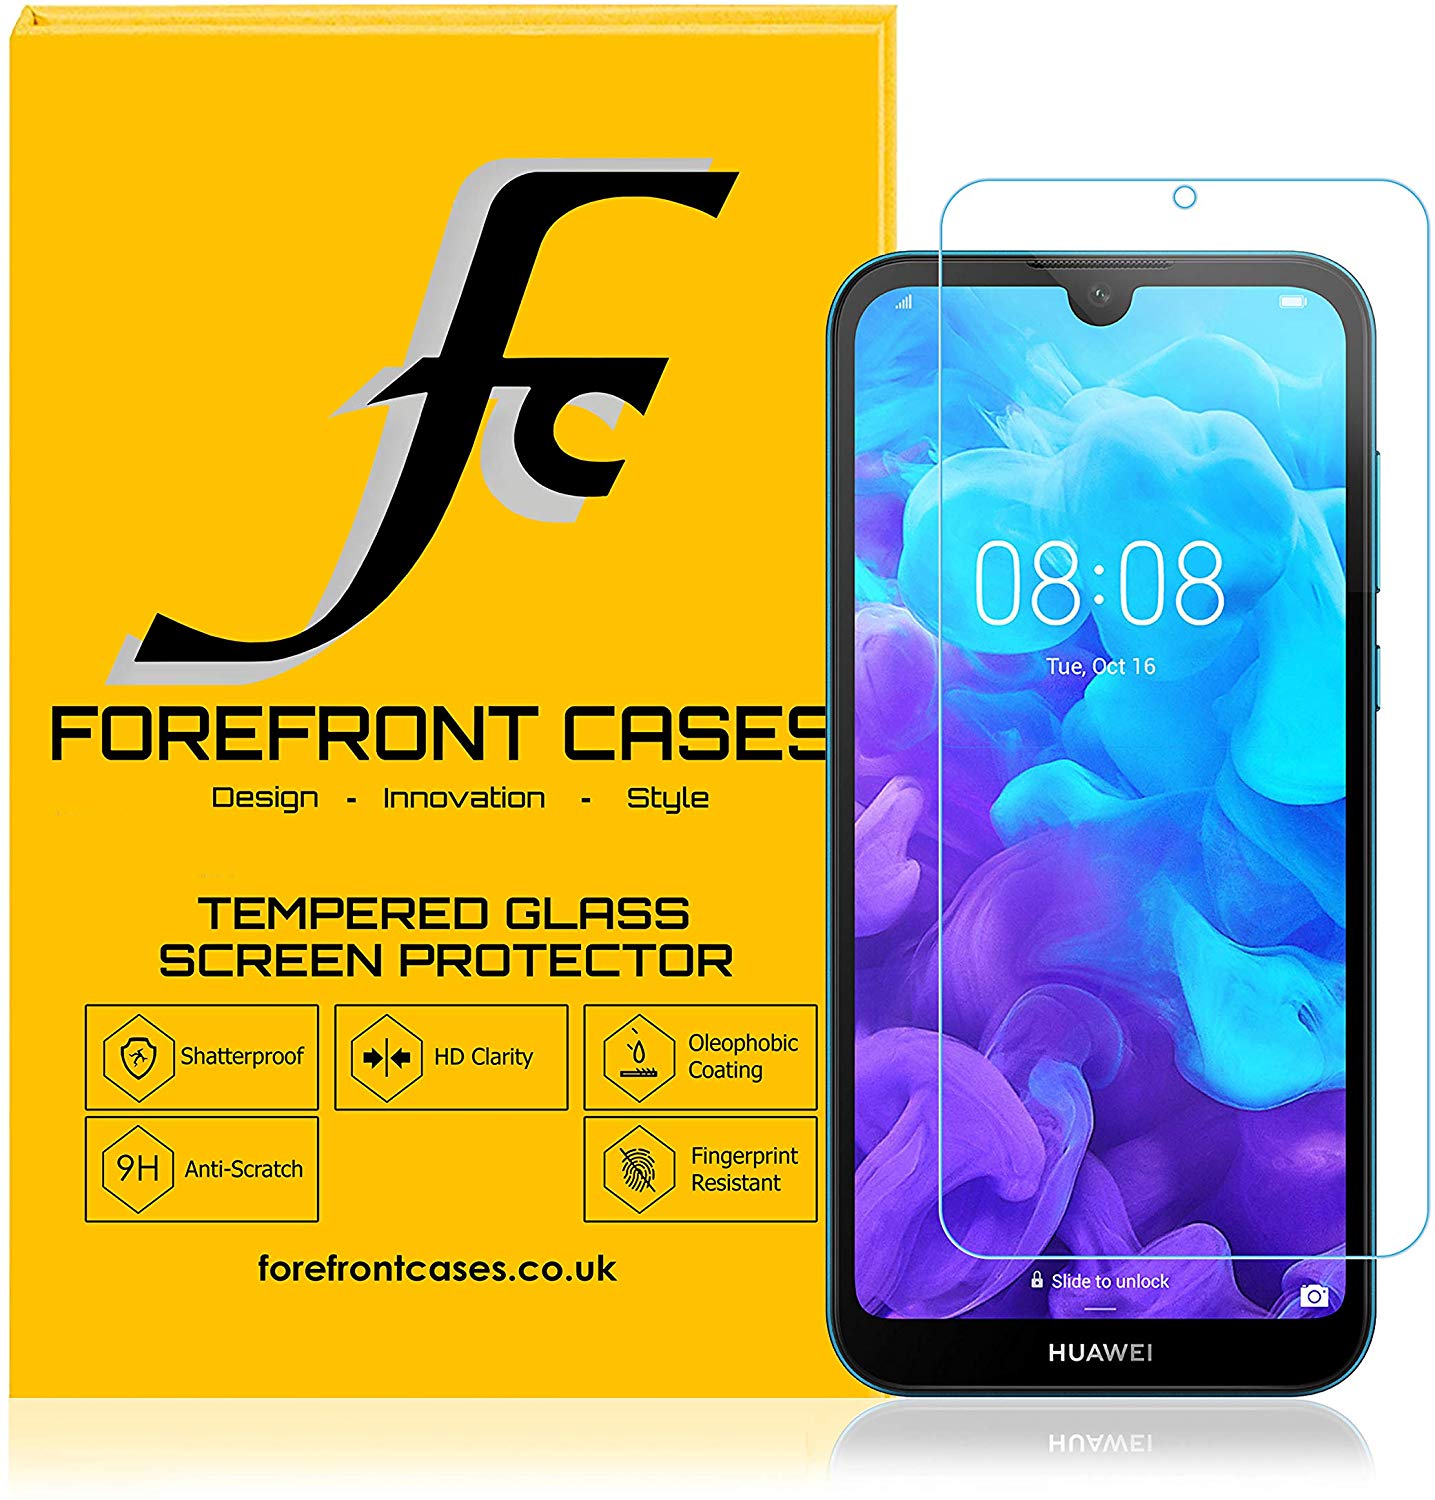 2 Pack UNEXTATI Premium Scratch Resistant Screen Protector HD Clear Tempered Glass Film for Google Pixel 2 Google Pixel 2 Tempered Glass Screen Protector 